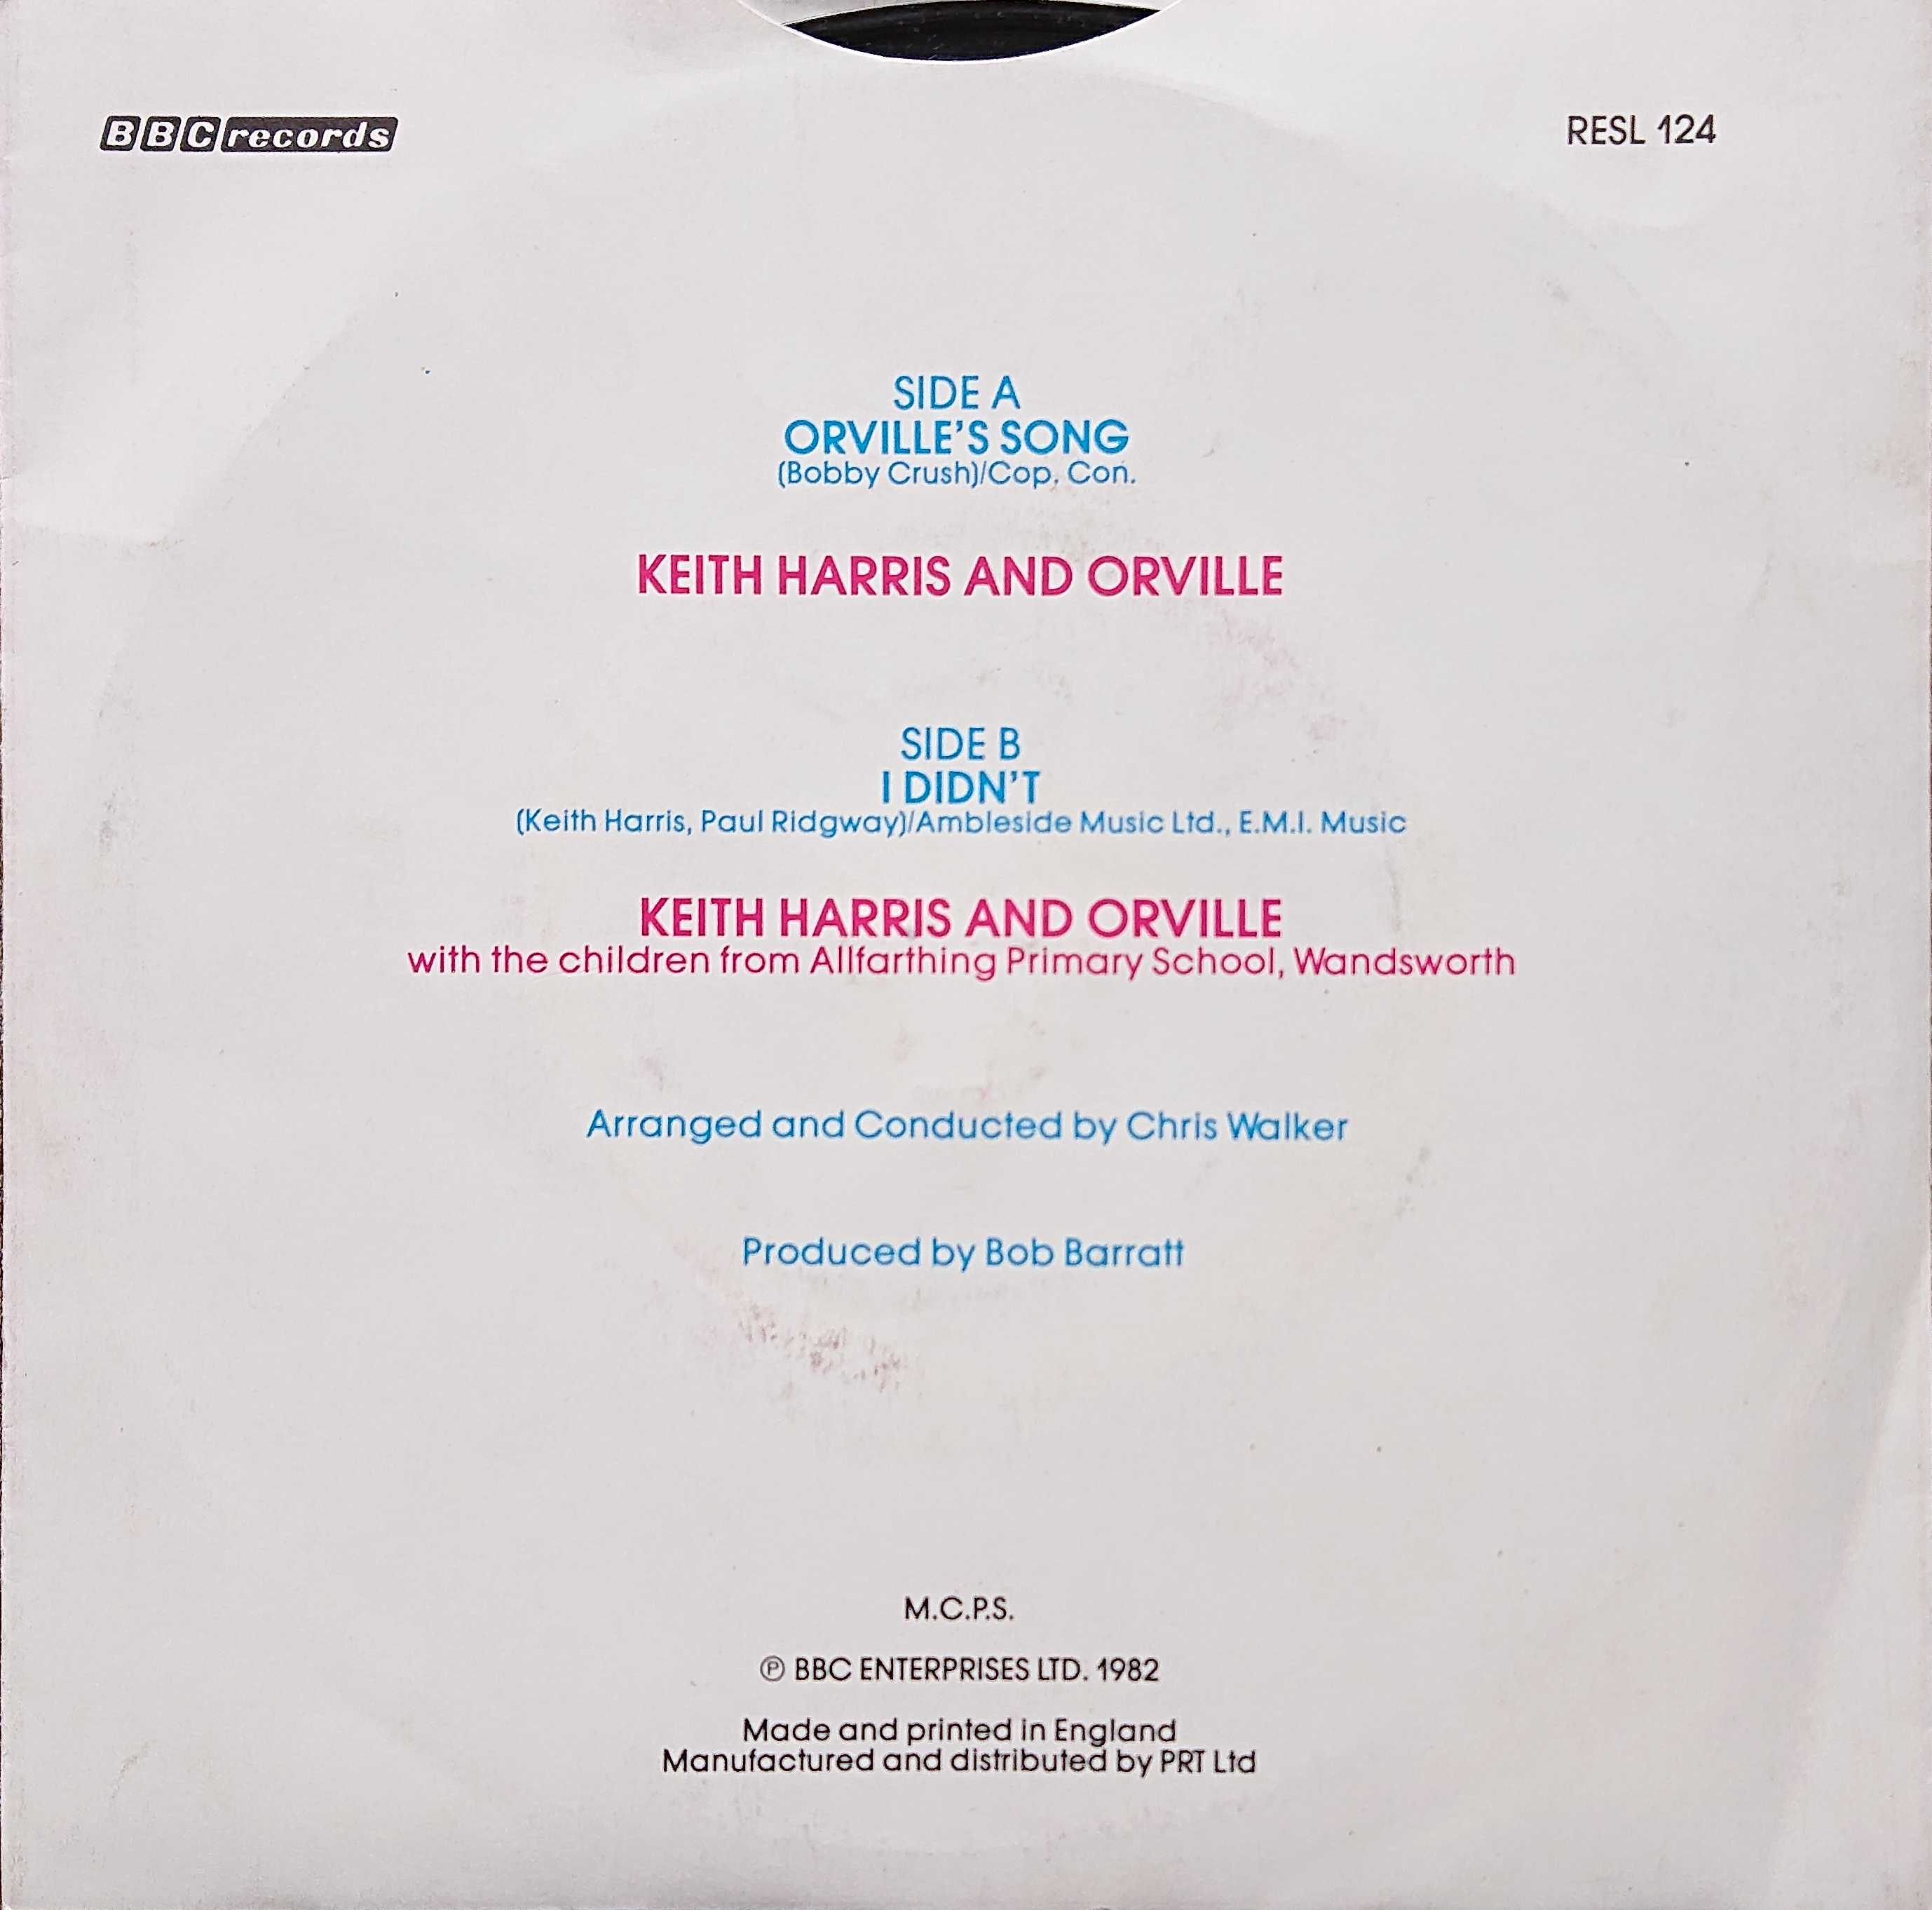 Picture of RESL 124-iD Orville's song by artist Keith Harris and Orville from the BBC records and Tapes library